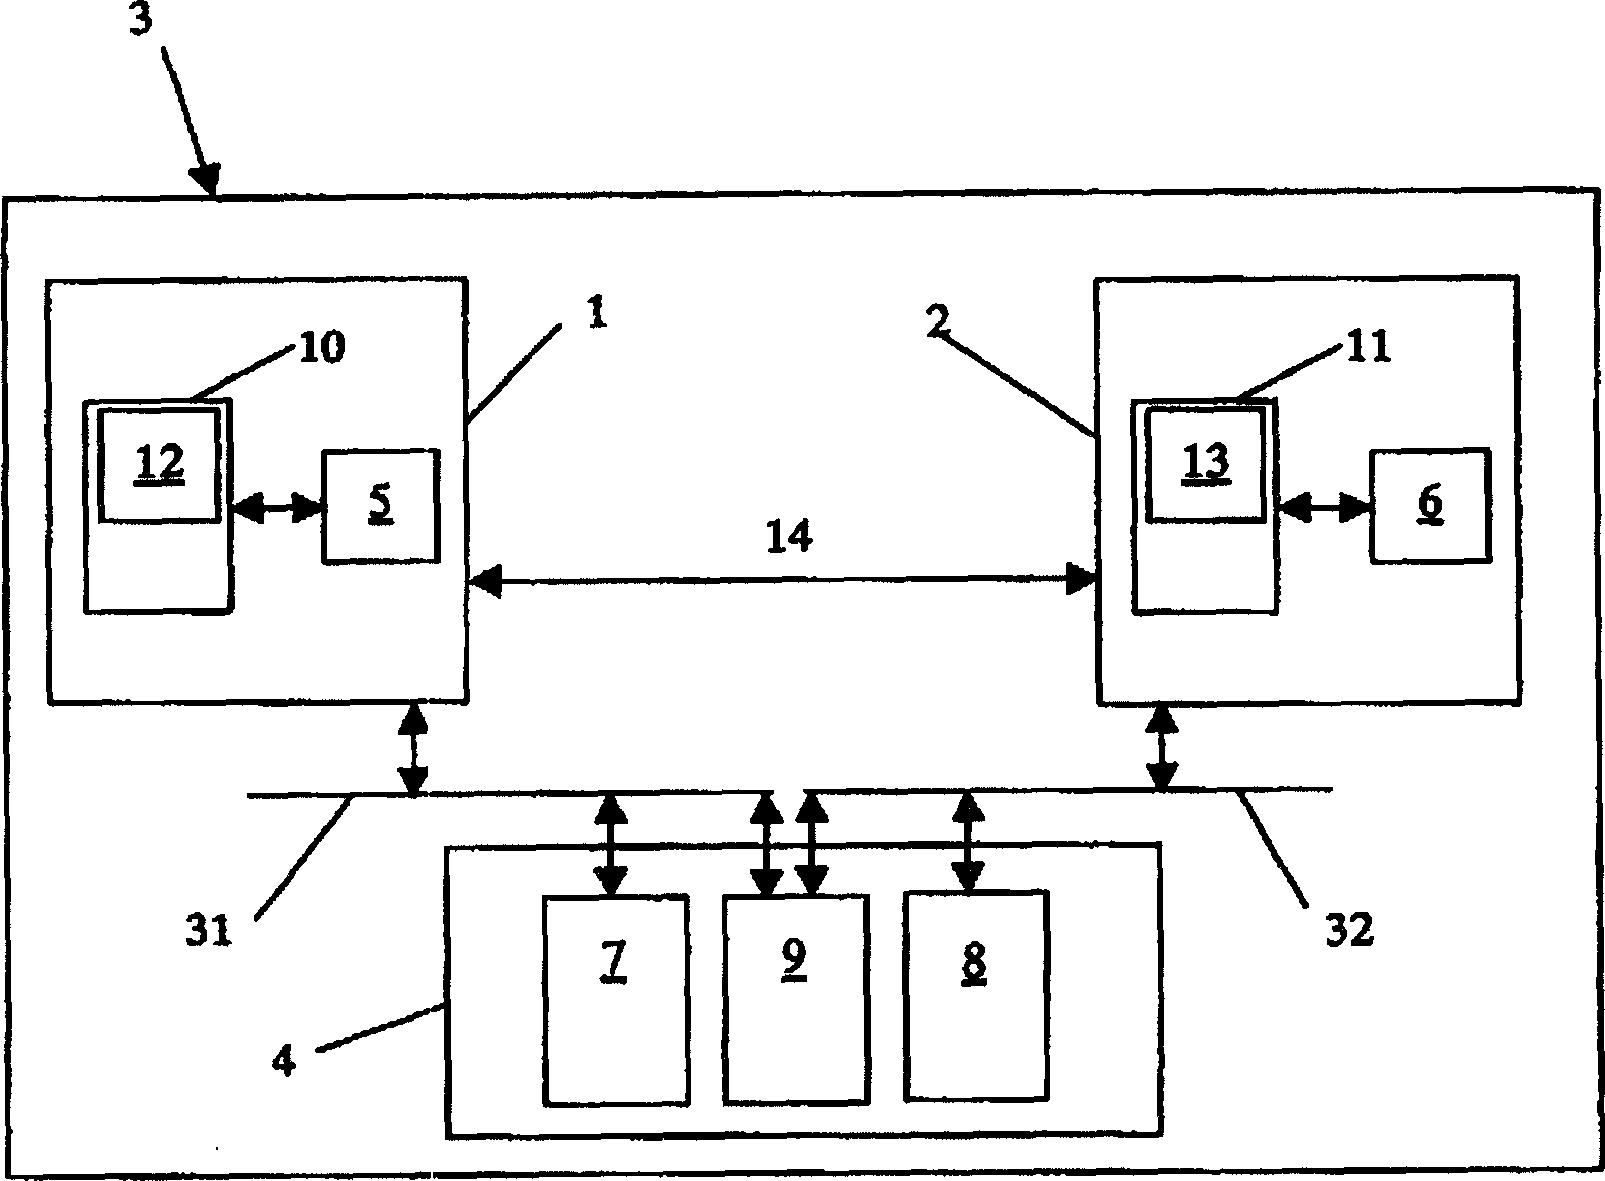 Data internal storage managing system and method, and related multiprocessor network